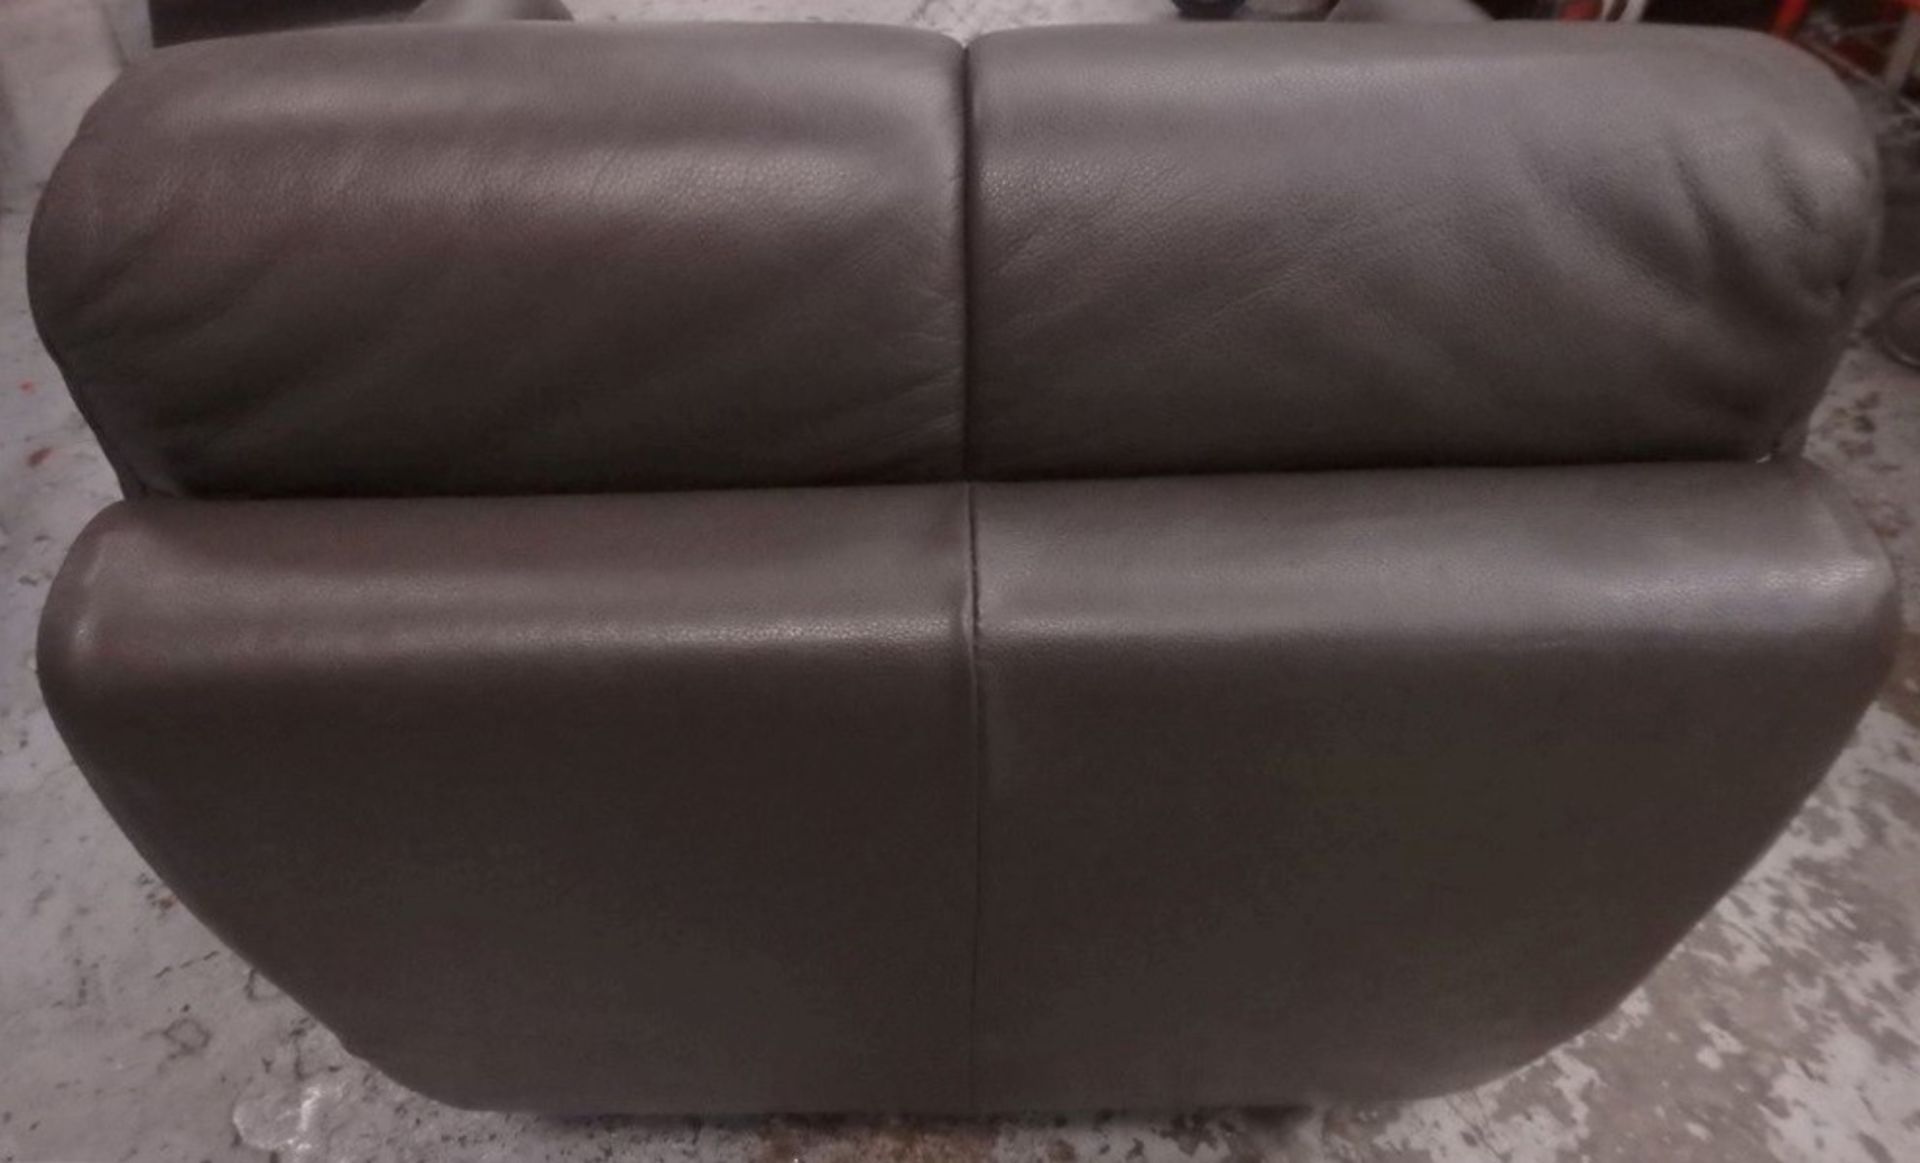 1 x Grey Leather Chair - Features A Fetching Fendi-style Design - L90xD100x80cm - CL050 - Ref: - Image 2 of 5